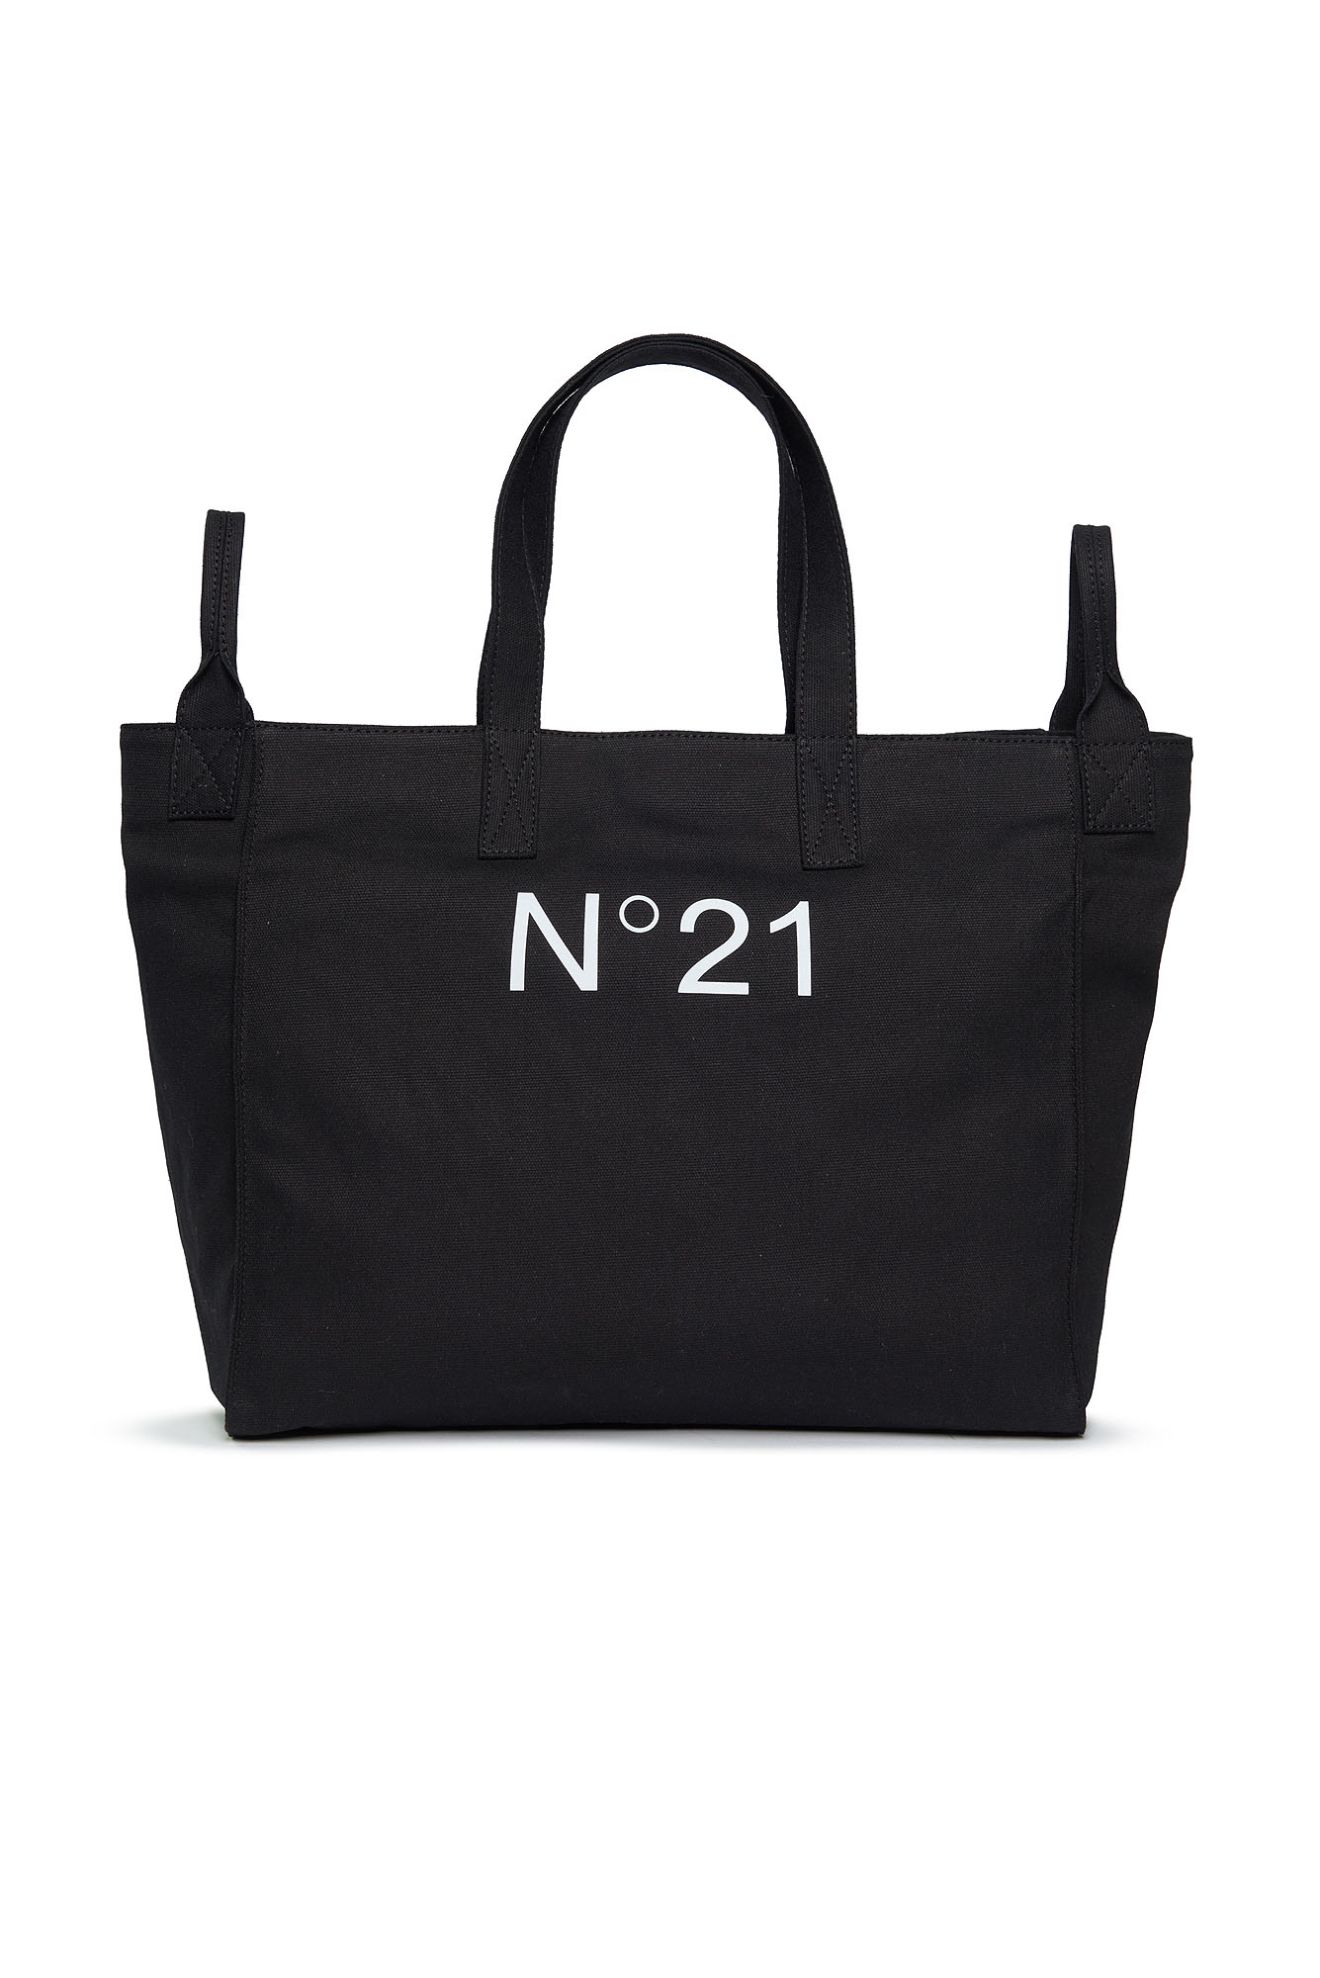 Stylish Black Coton Shopping Bag Featuring One-Color Graphic Print